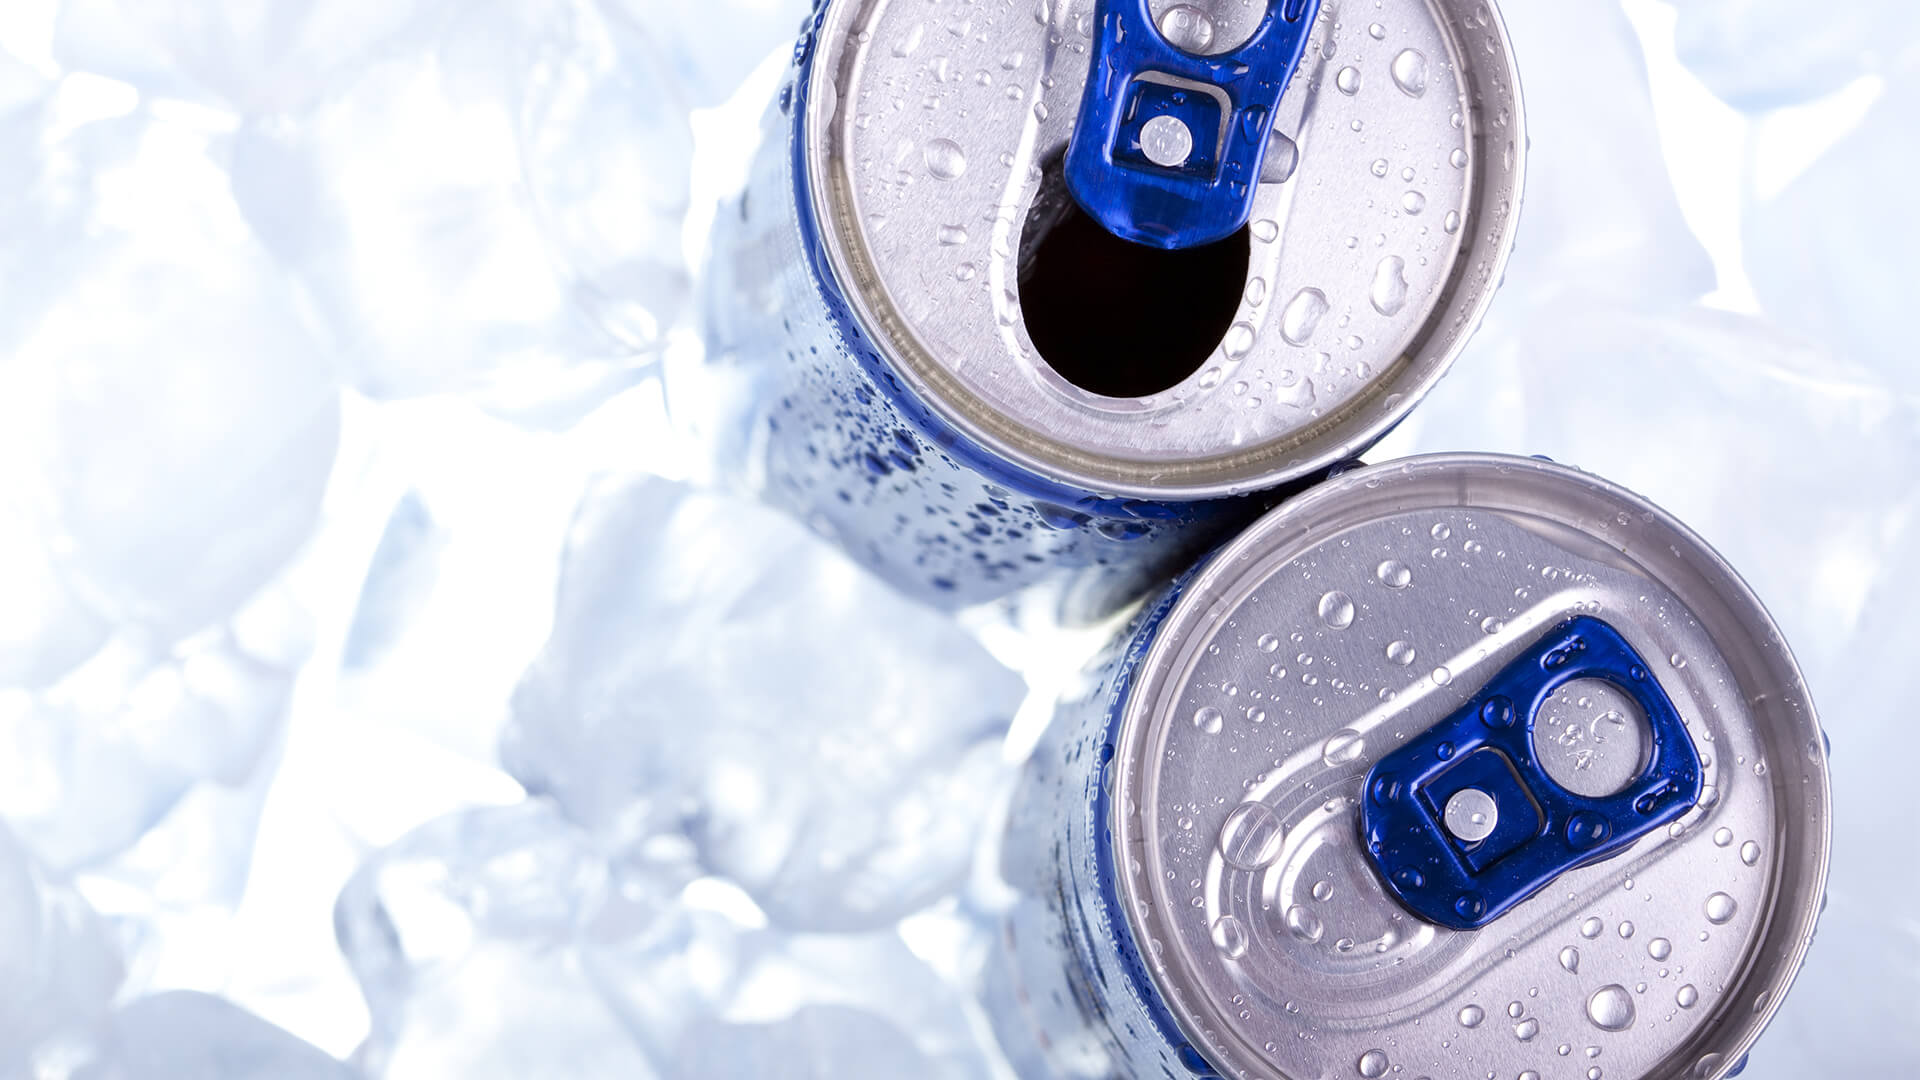 Open drink and closed drink cans with ring pulls, sitting in ice